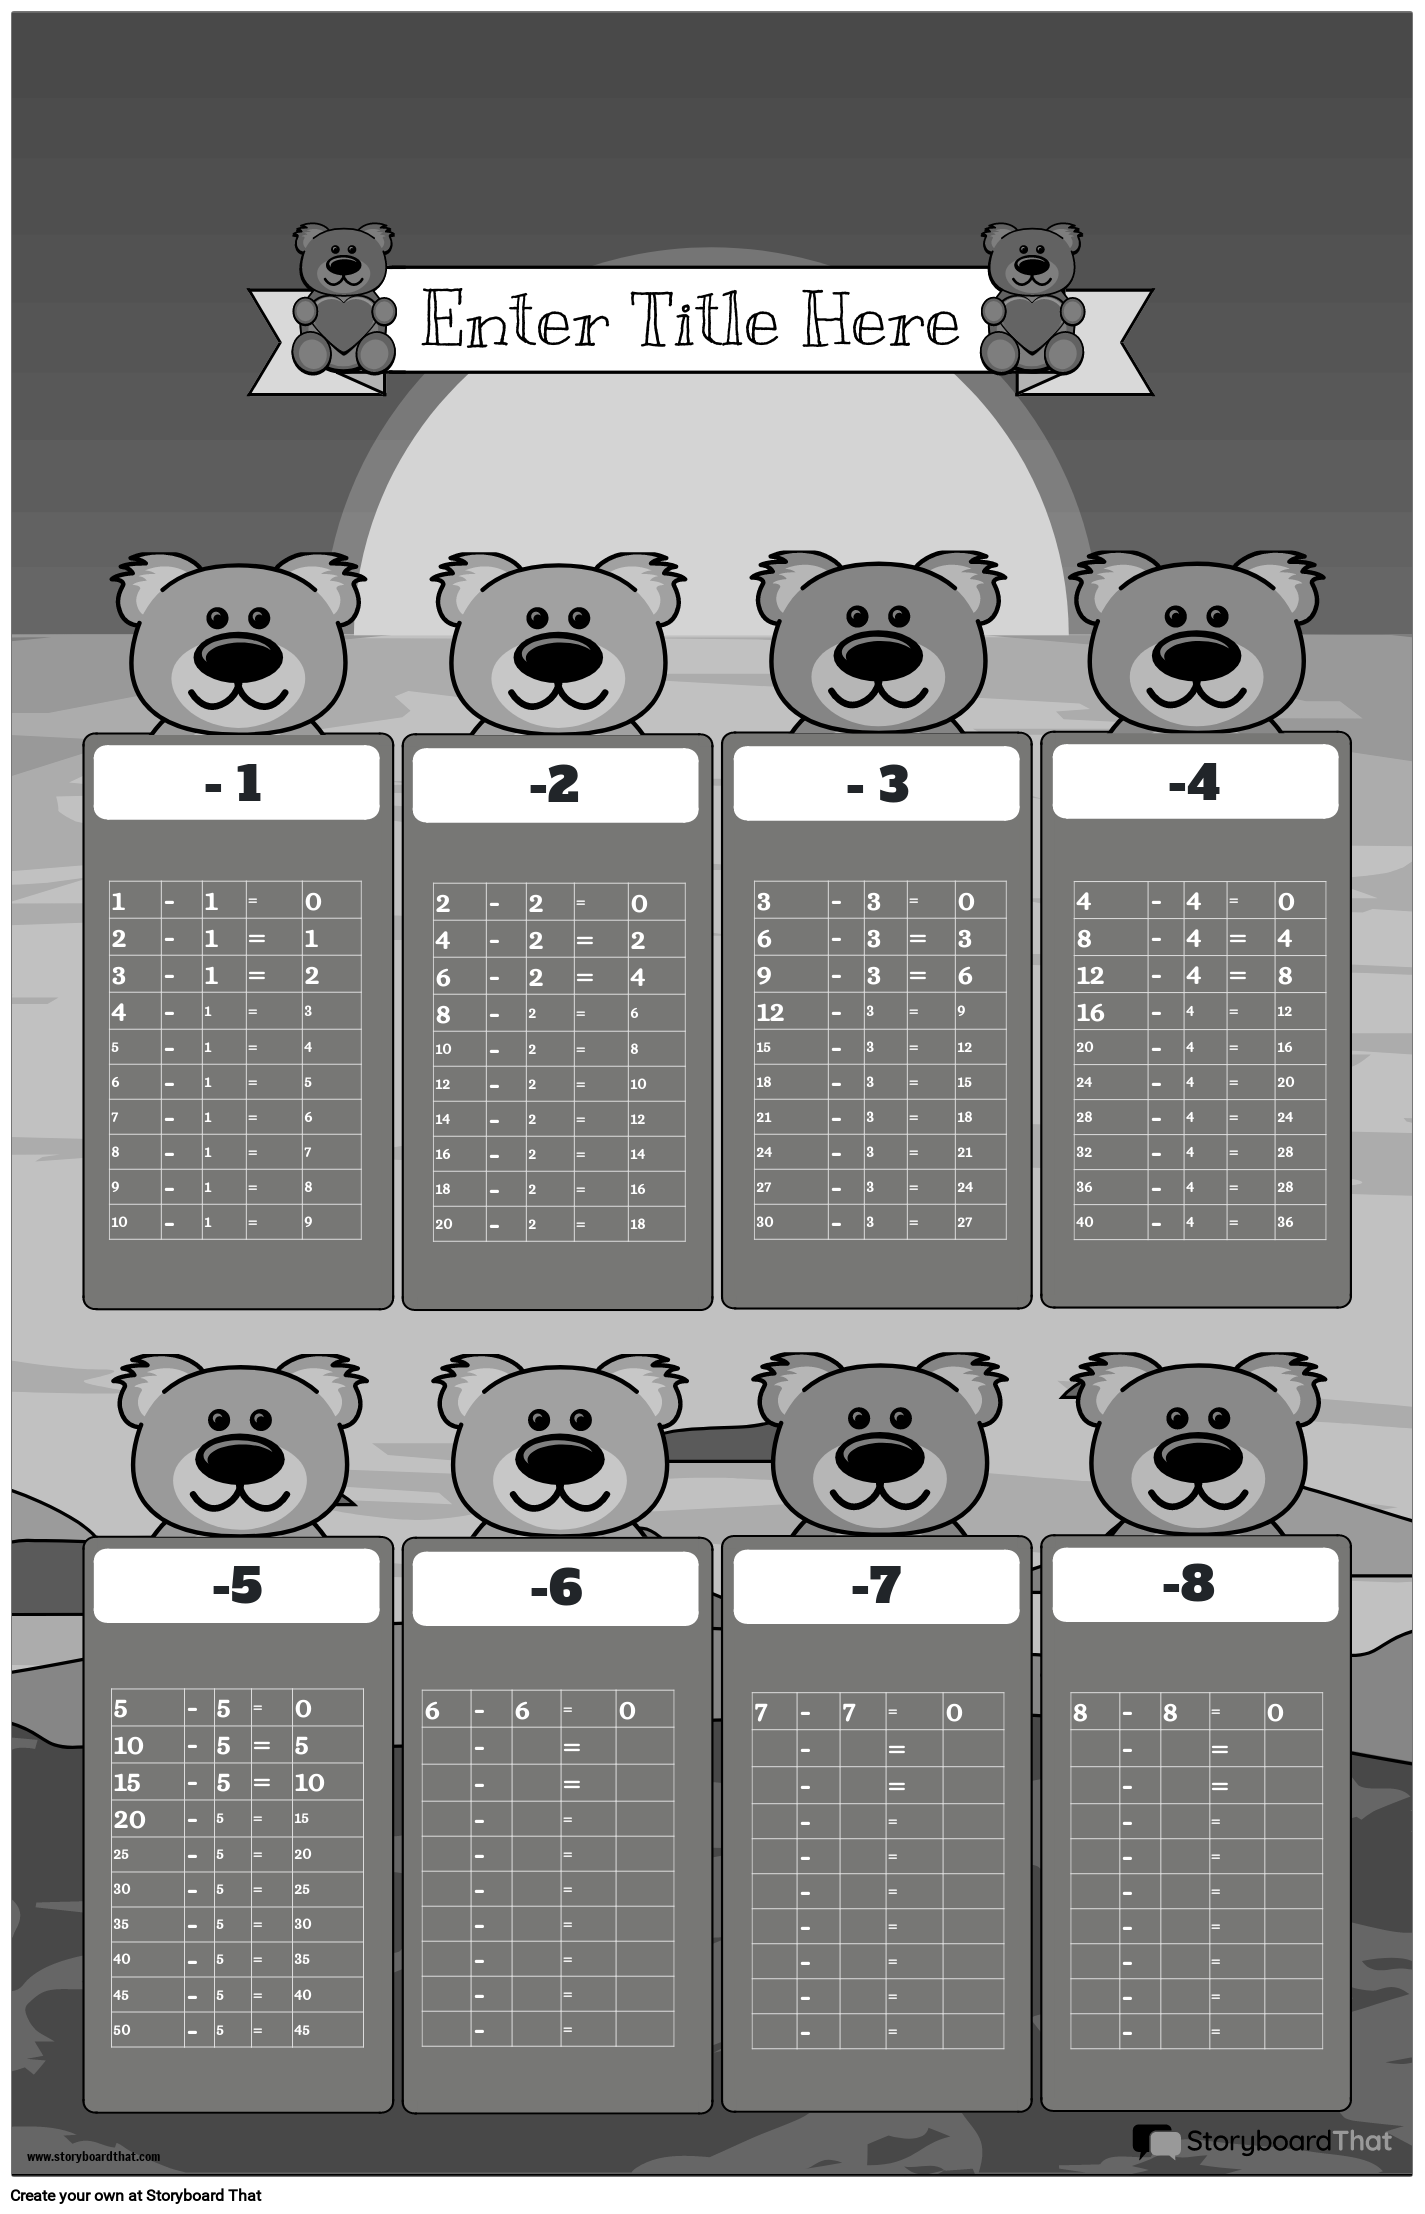 Bear-themed Subtraction chart Poster